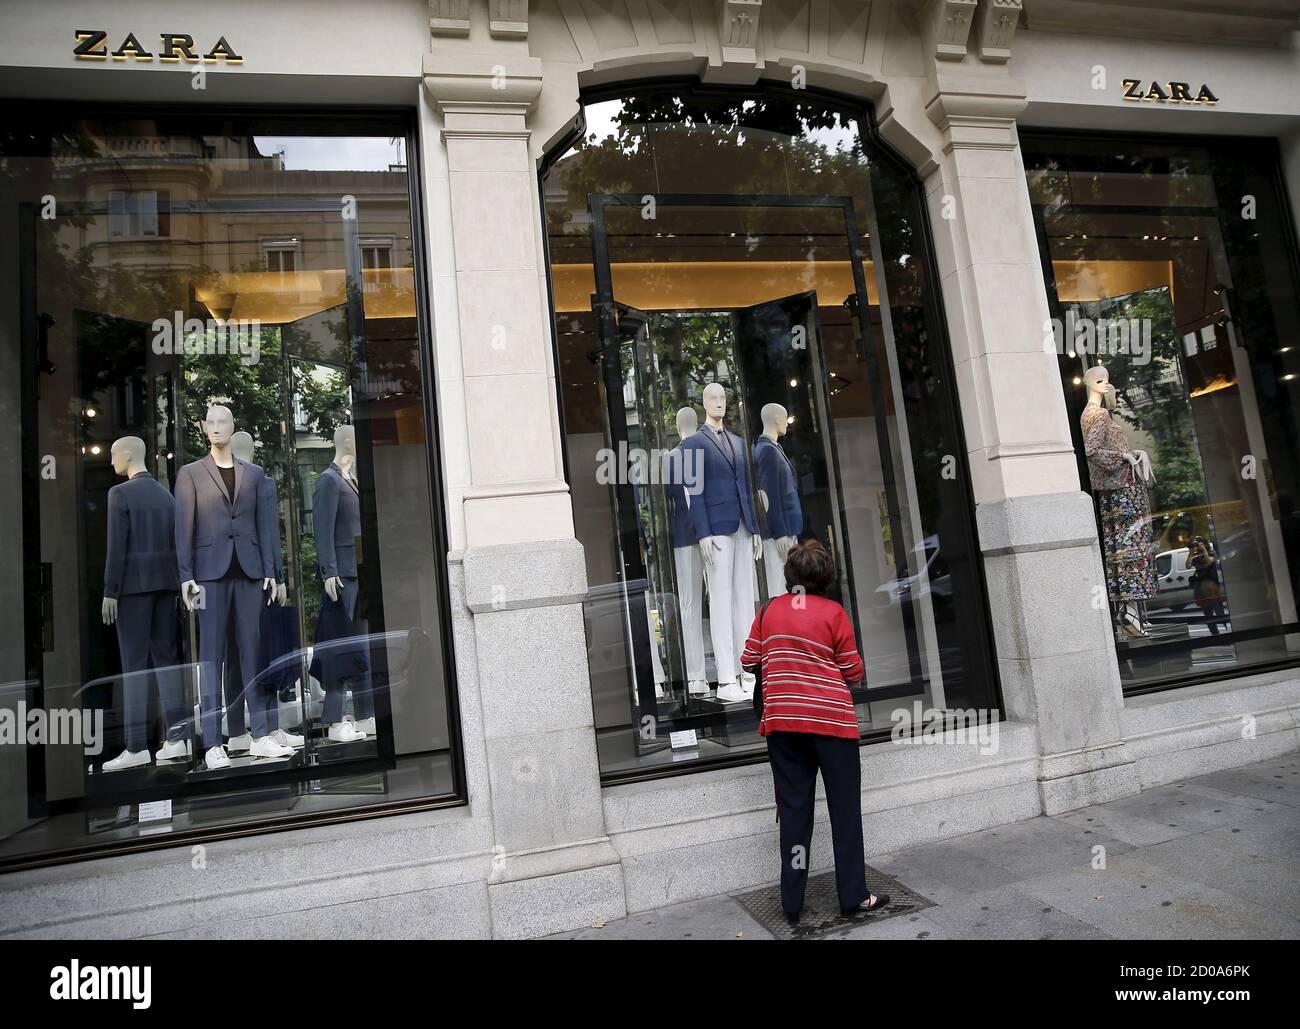 A woman shop windows at a Zara store in Madrid, Spain, June 10, 2015.  Spain's Inditex, owner of clothing retailer Zara, reported better than  expected quarterly profit on Wednesday, as its global